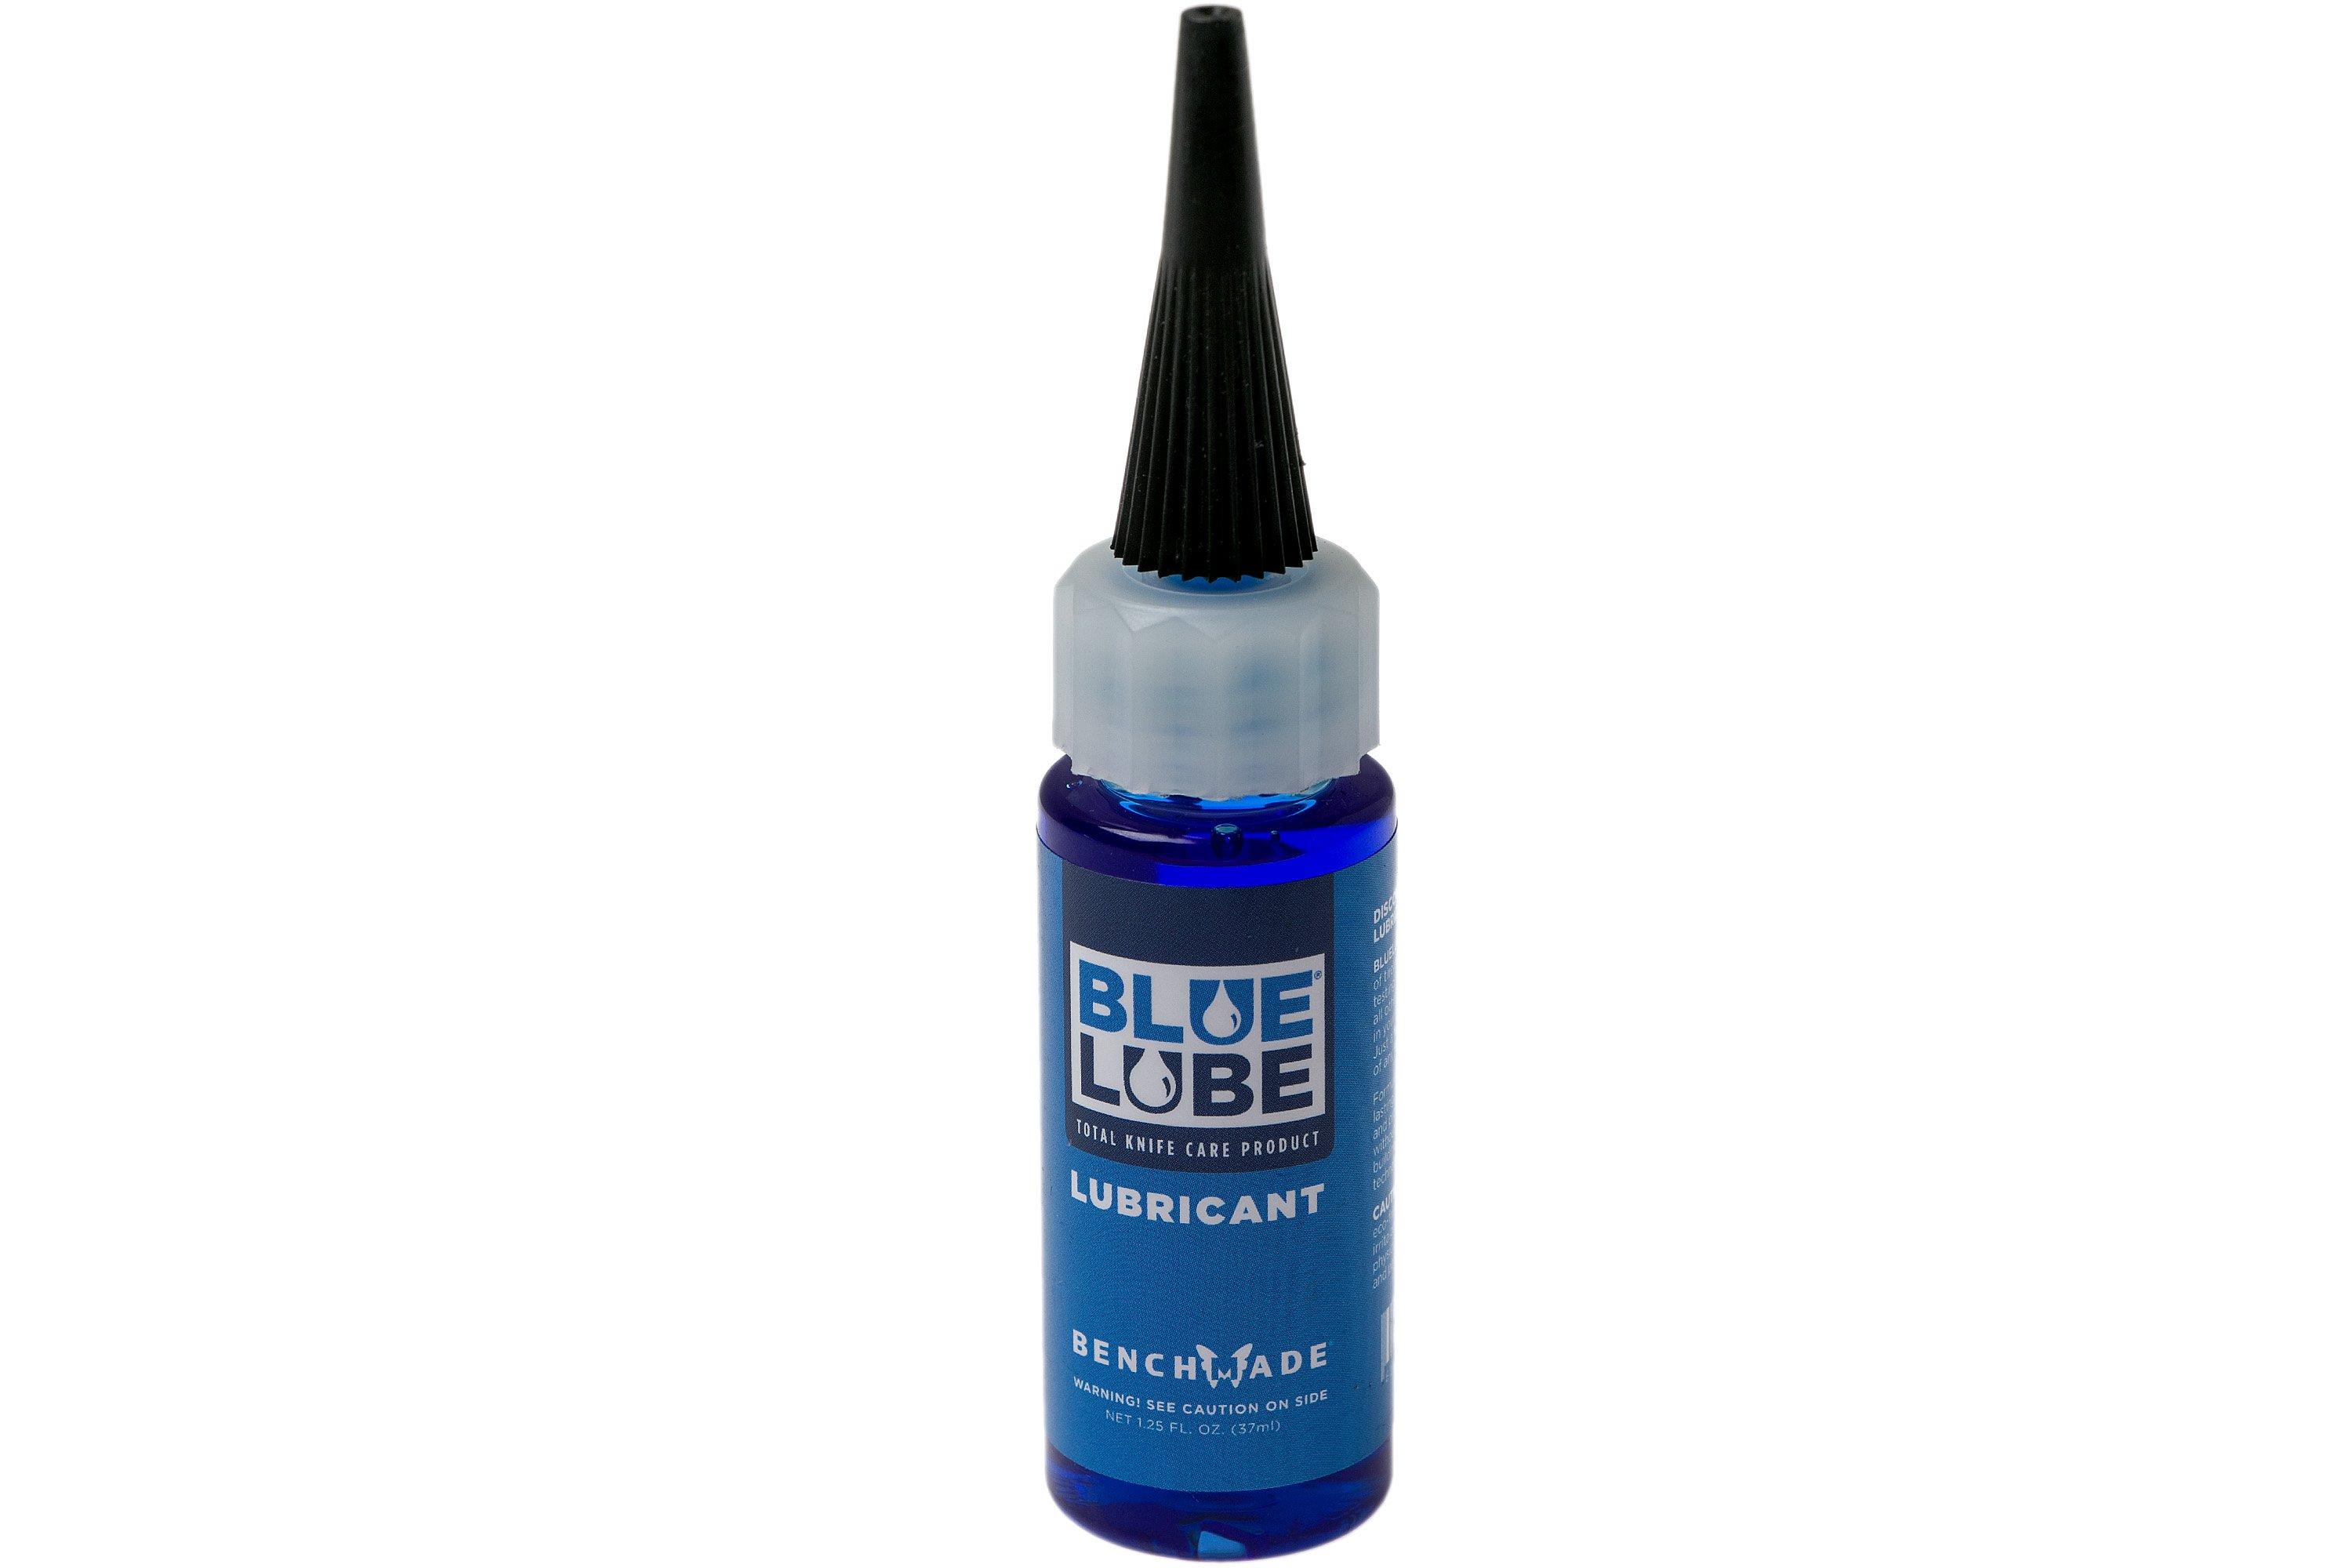 Benchmade Blue Lube Lubricant 983900  Advantageously shopping at